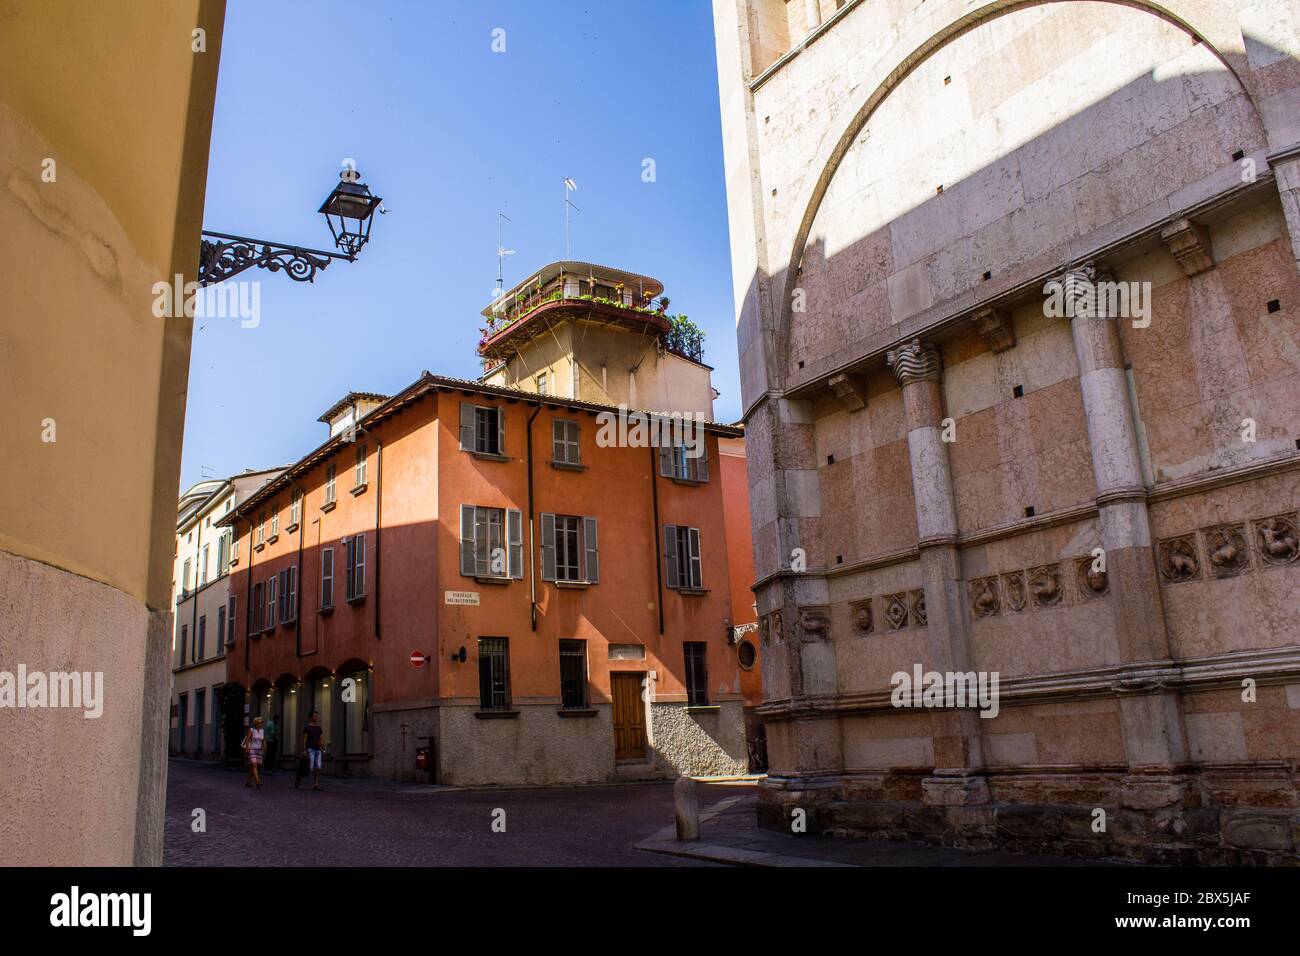 Parma, Italy - July 8, 2017: People Walking near Parma Baptistery in Piazzale del Battistero on a Sunny Day Stock Photo